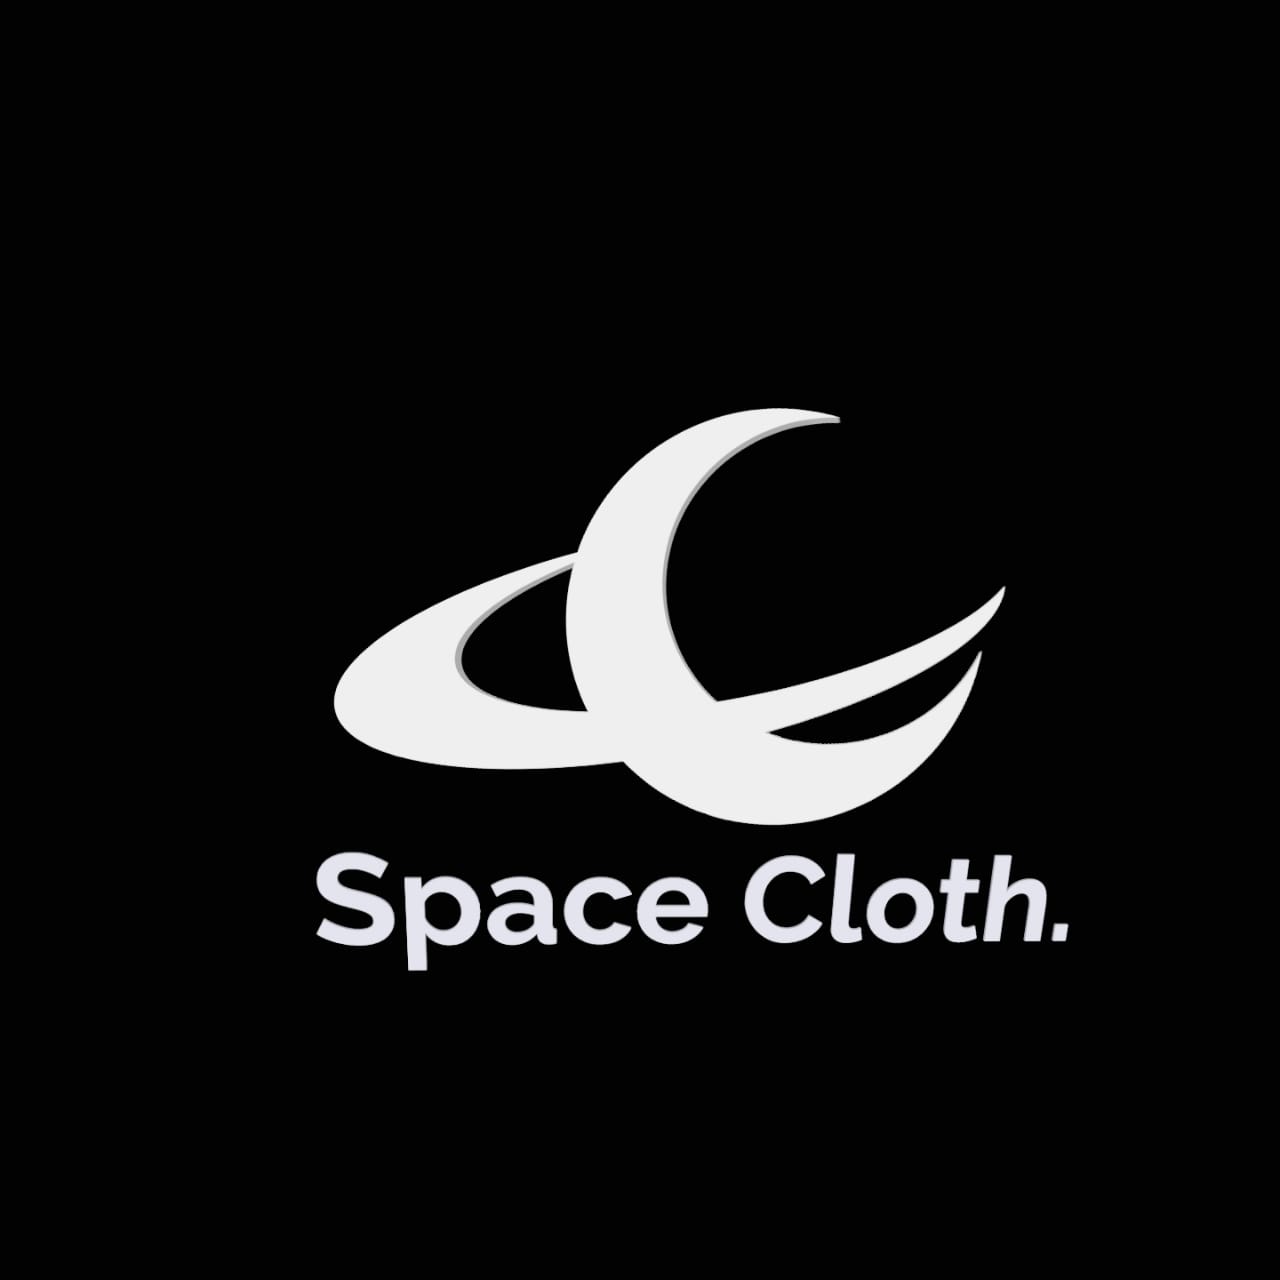 Space Cloth